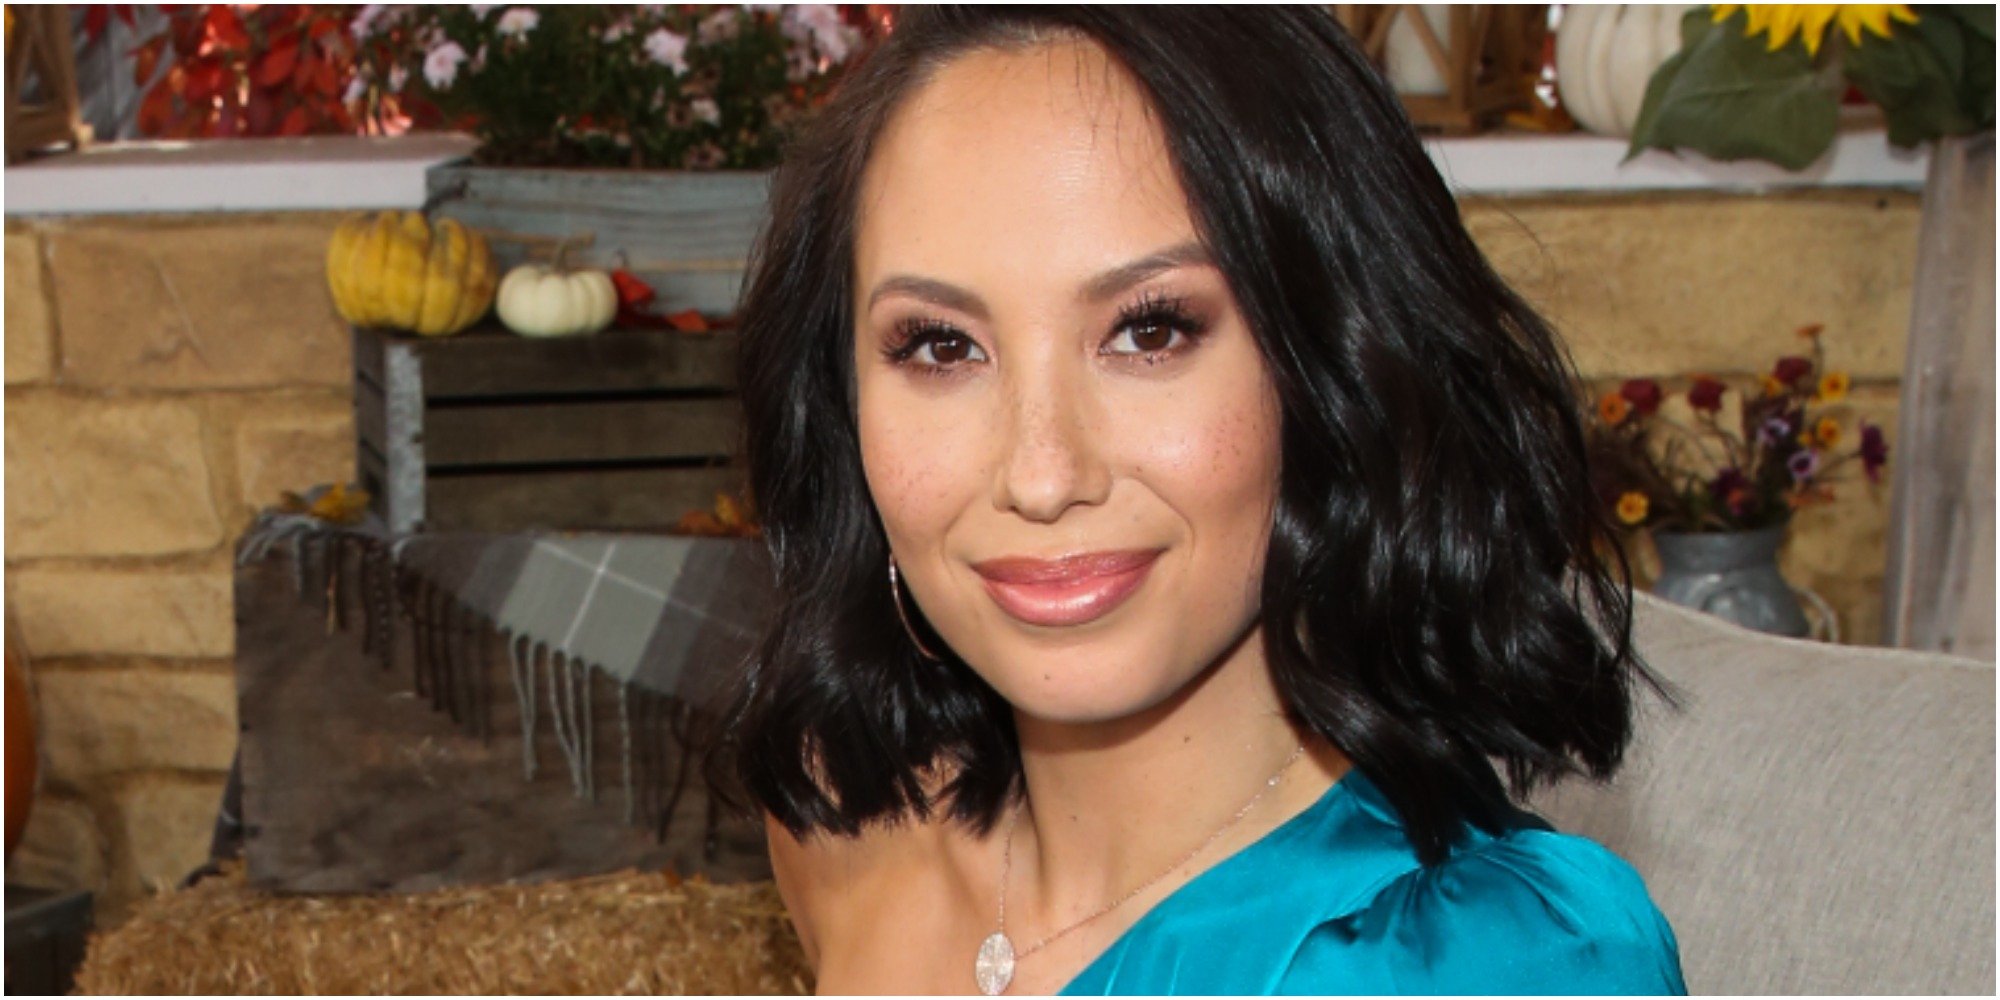 Cheryl Burke admitted she's dealing with long-haul COVID-19 symptoms.